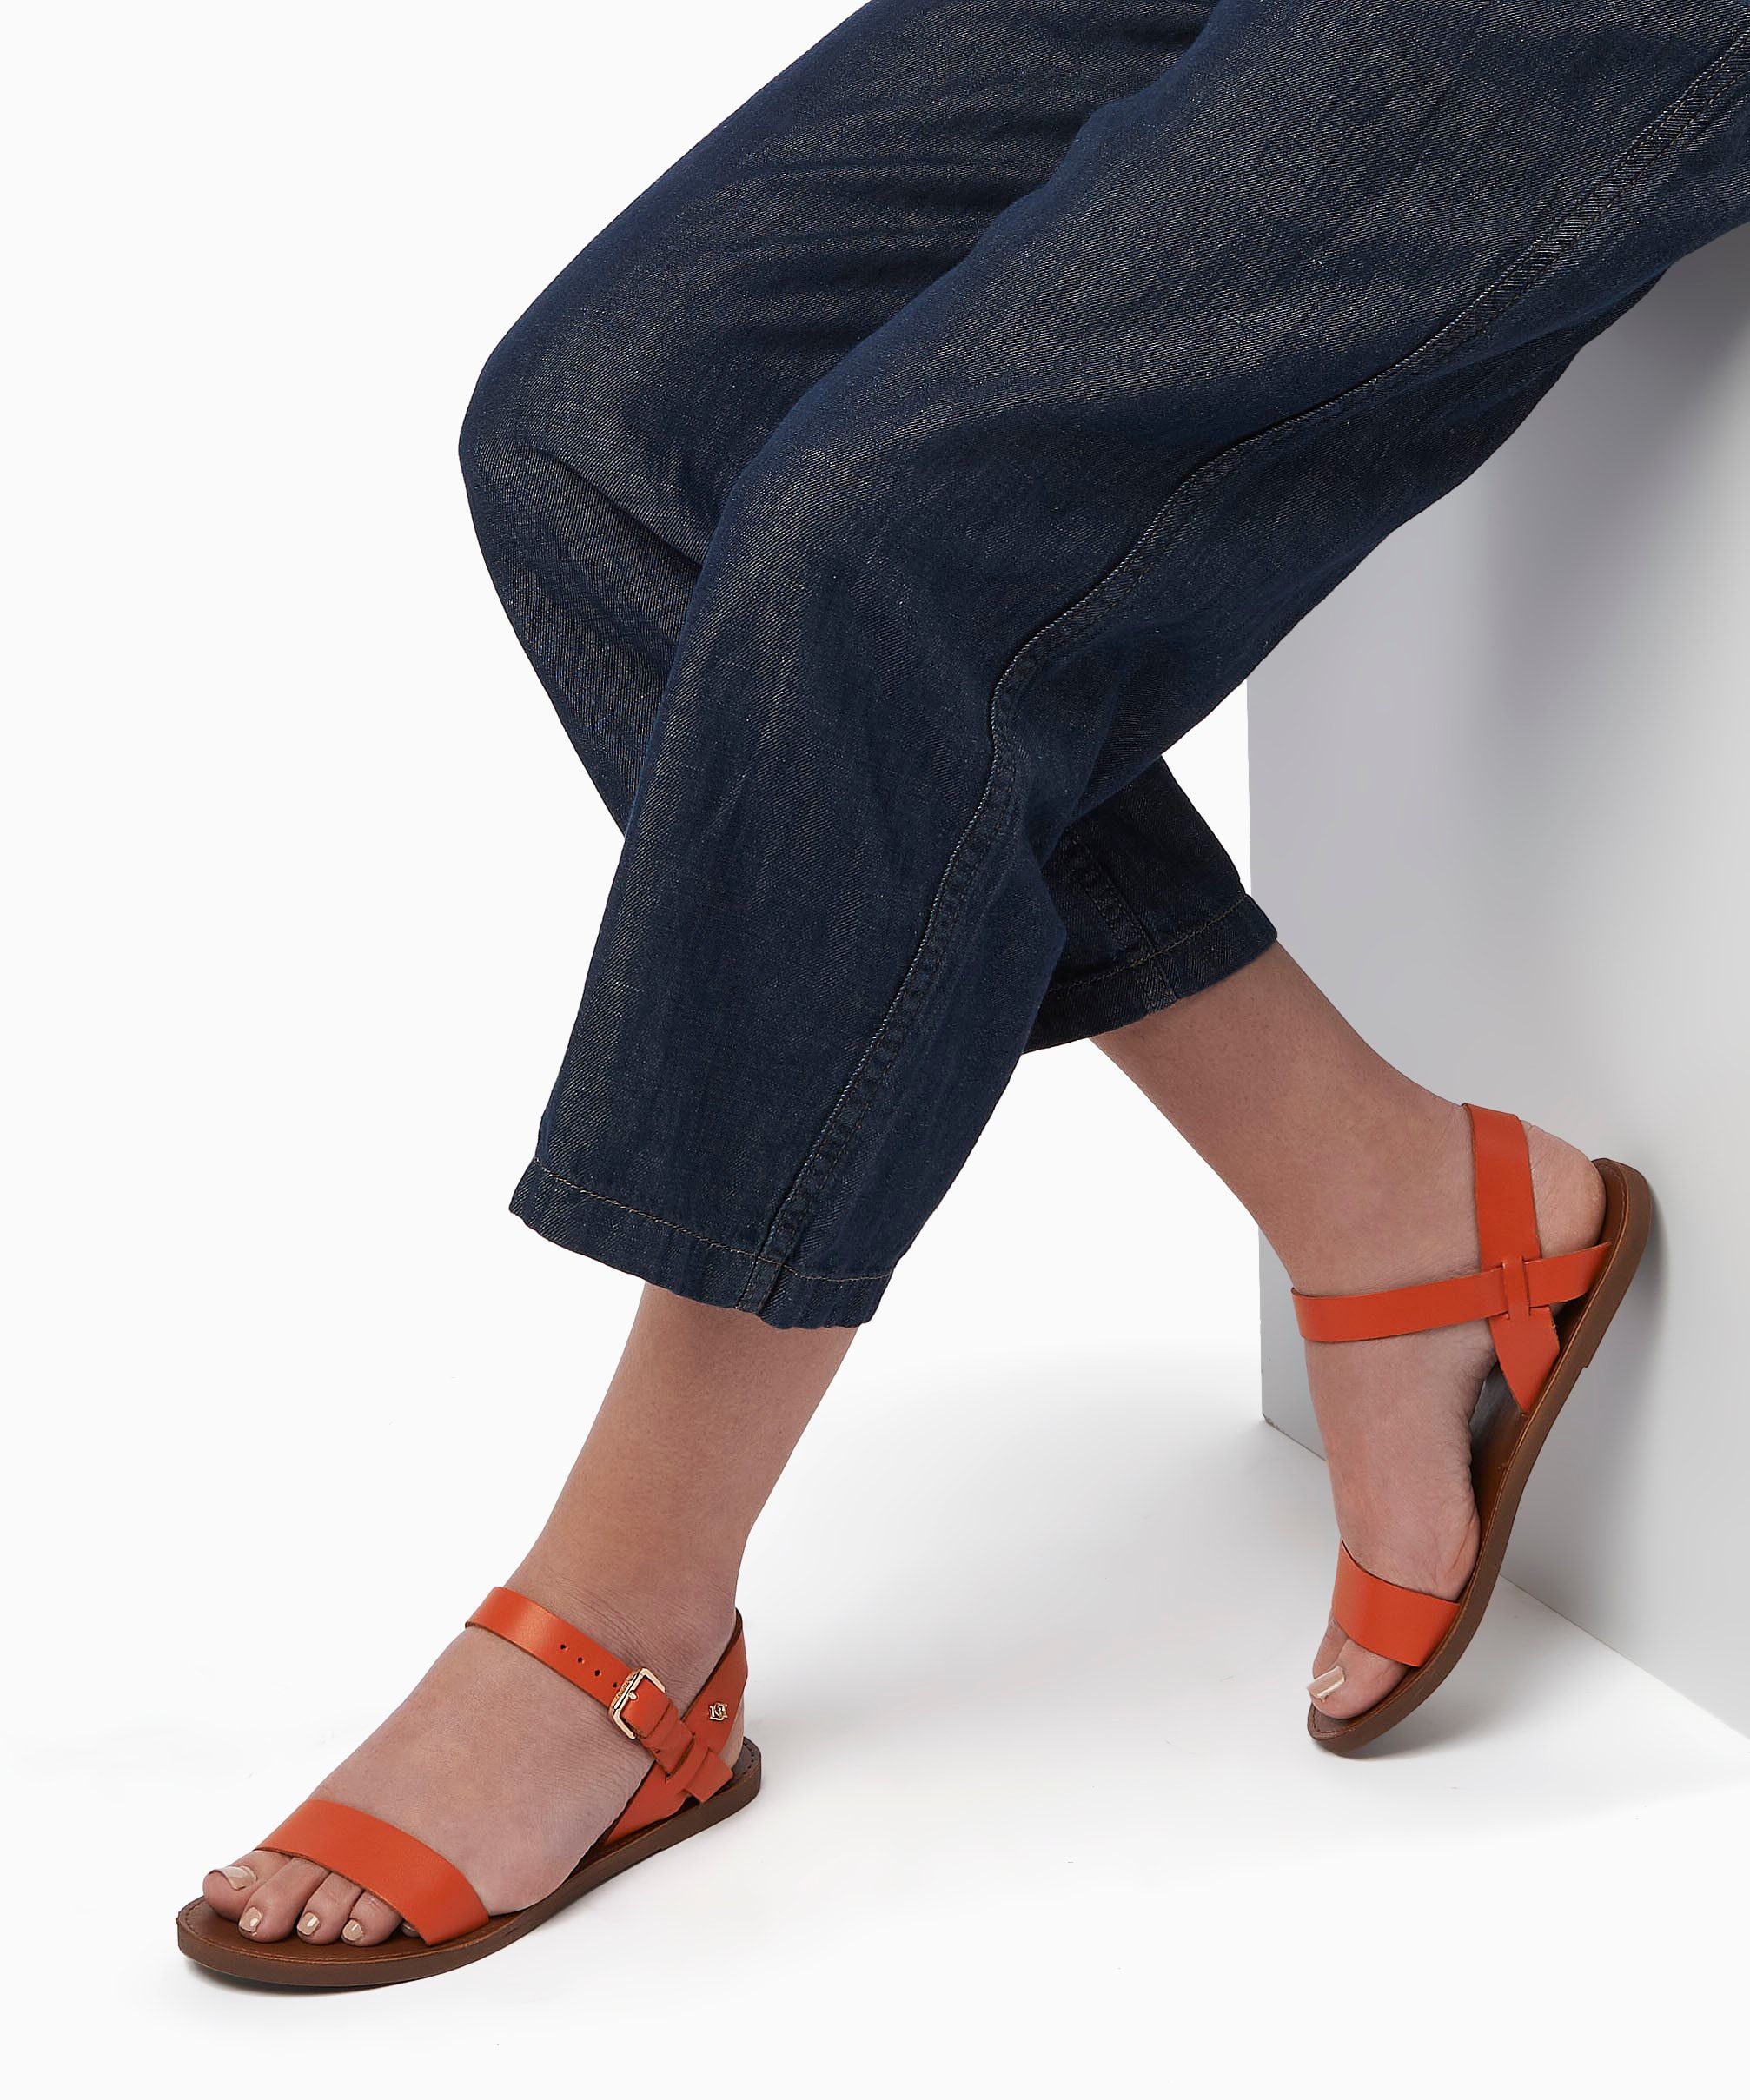 Far-flung escapes call for paired back summer sandals. Crafted from soft leather and featuring an adjustable ankle strap this minimal style will fit seamlessly into your new season wardrobe.